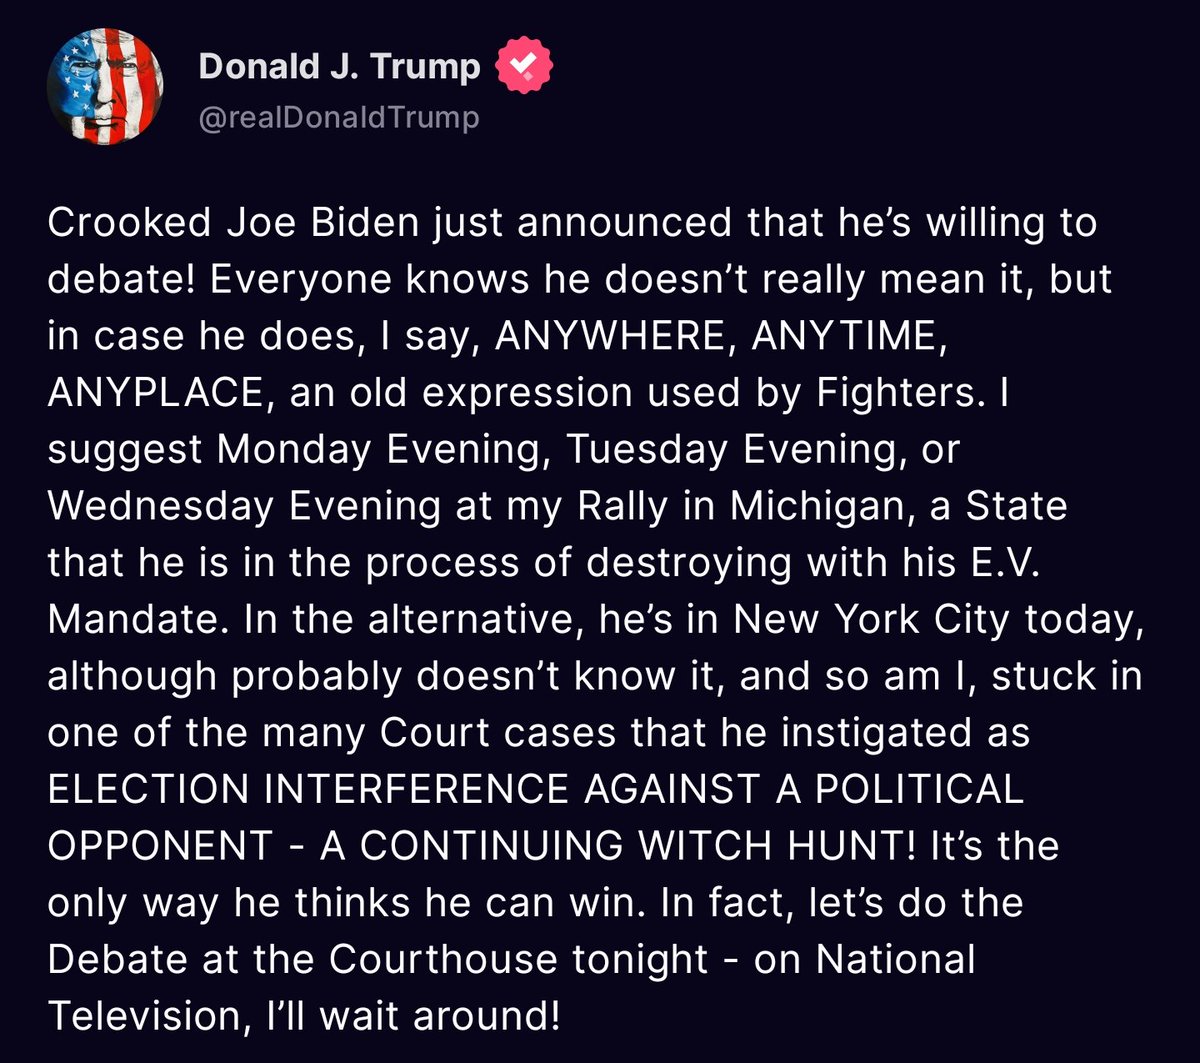 💥💥💥BOOOOOM TIME💥💥💥
‼️‼️TRUMP---VS---BIDEN‼️‼️
‼️ON NATIONAL TELEVISION‼️ 

Crooked Joe Biden just announced that he’s willing to debate! Everyone knows he doesn’t really mean it, but in case he does, I say, ANYWHERE, ANYTIME, ANYPLACE, an old expression used by Fighters. I…